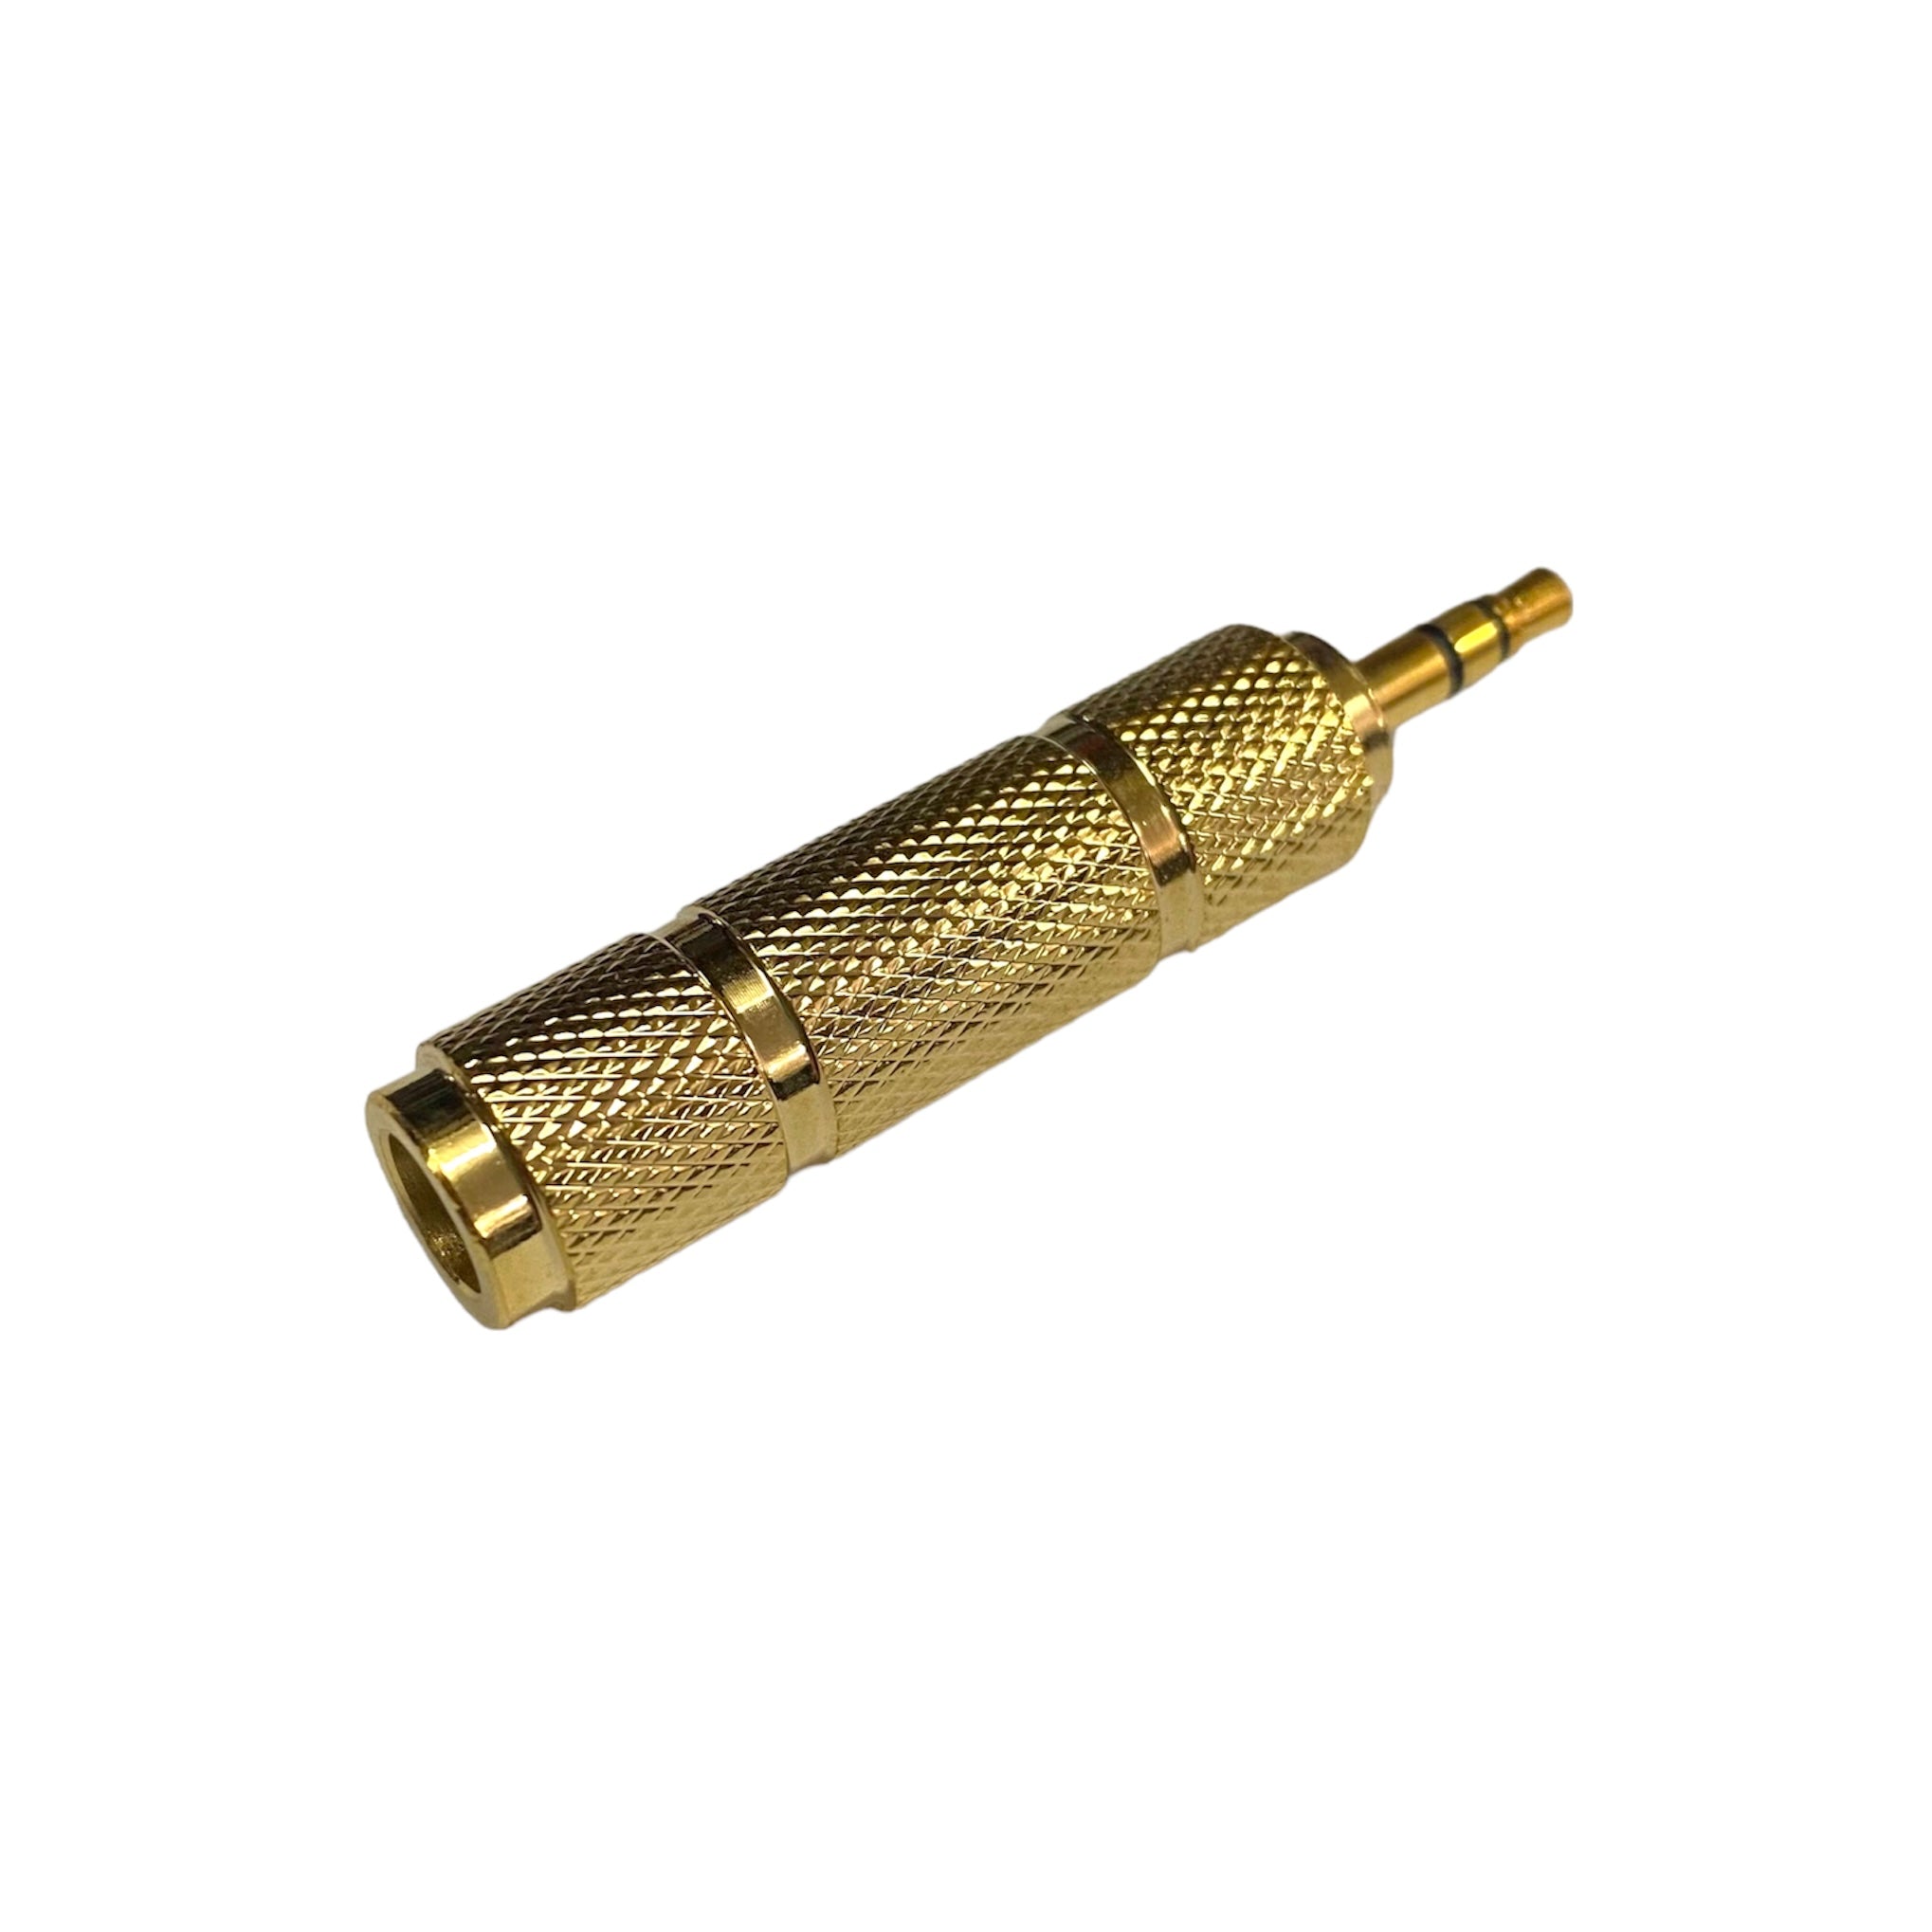 Adaptor - Stereo 6.3mm Female to 3.5mm Male - Gold